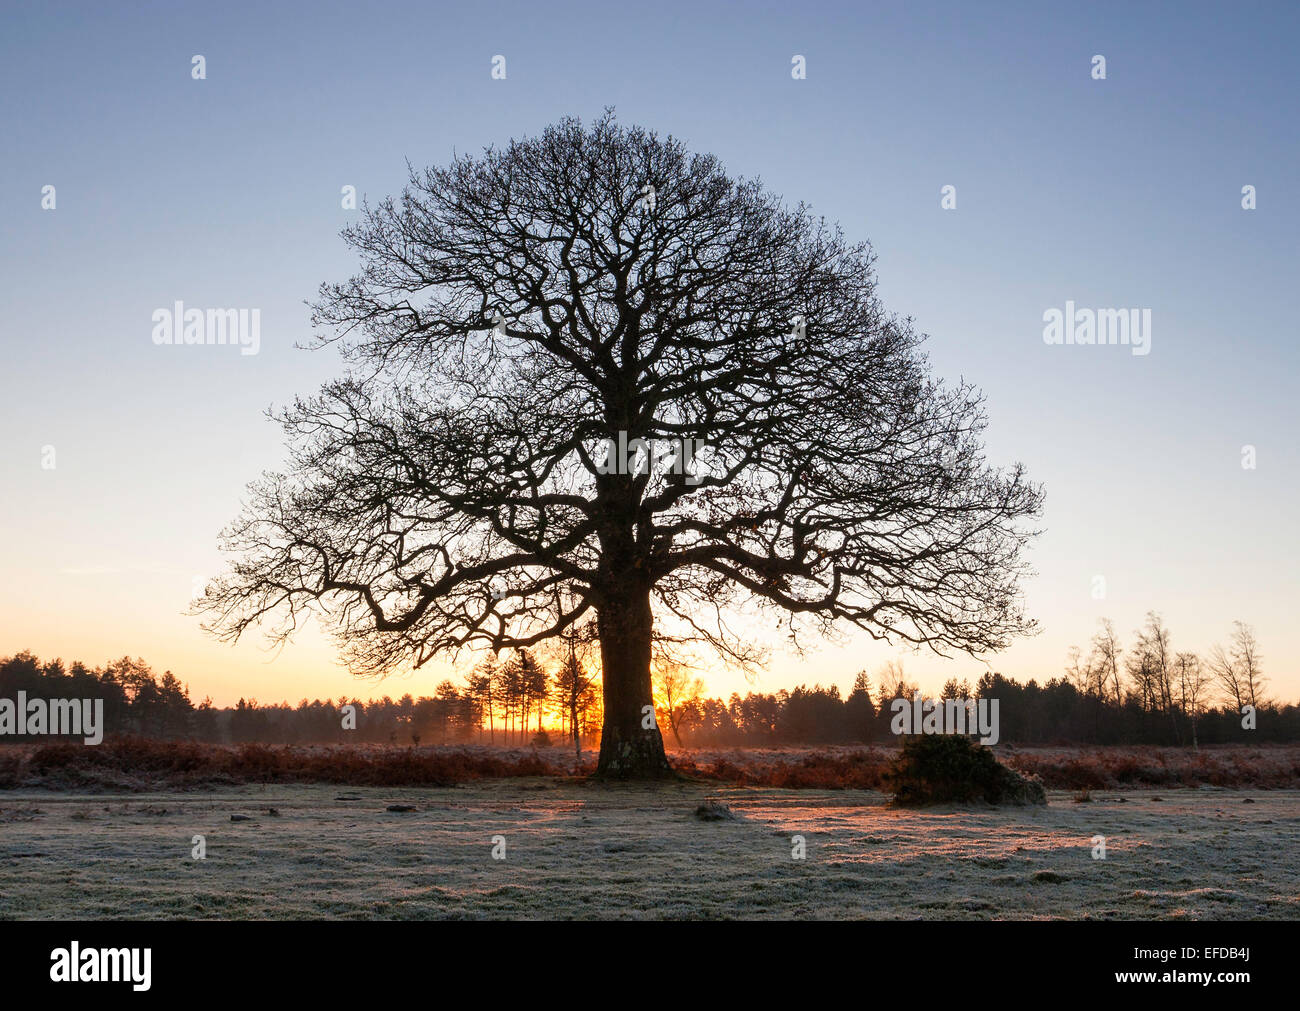 A large mature oak tree in winter with the sun rising directly behind the tree casting a long shadow towards the viewer. Stock Photo